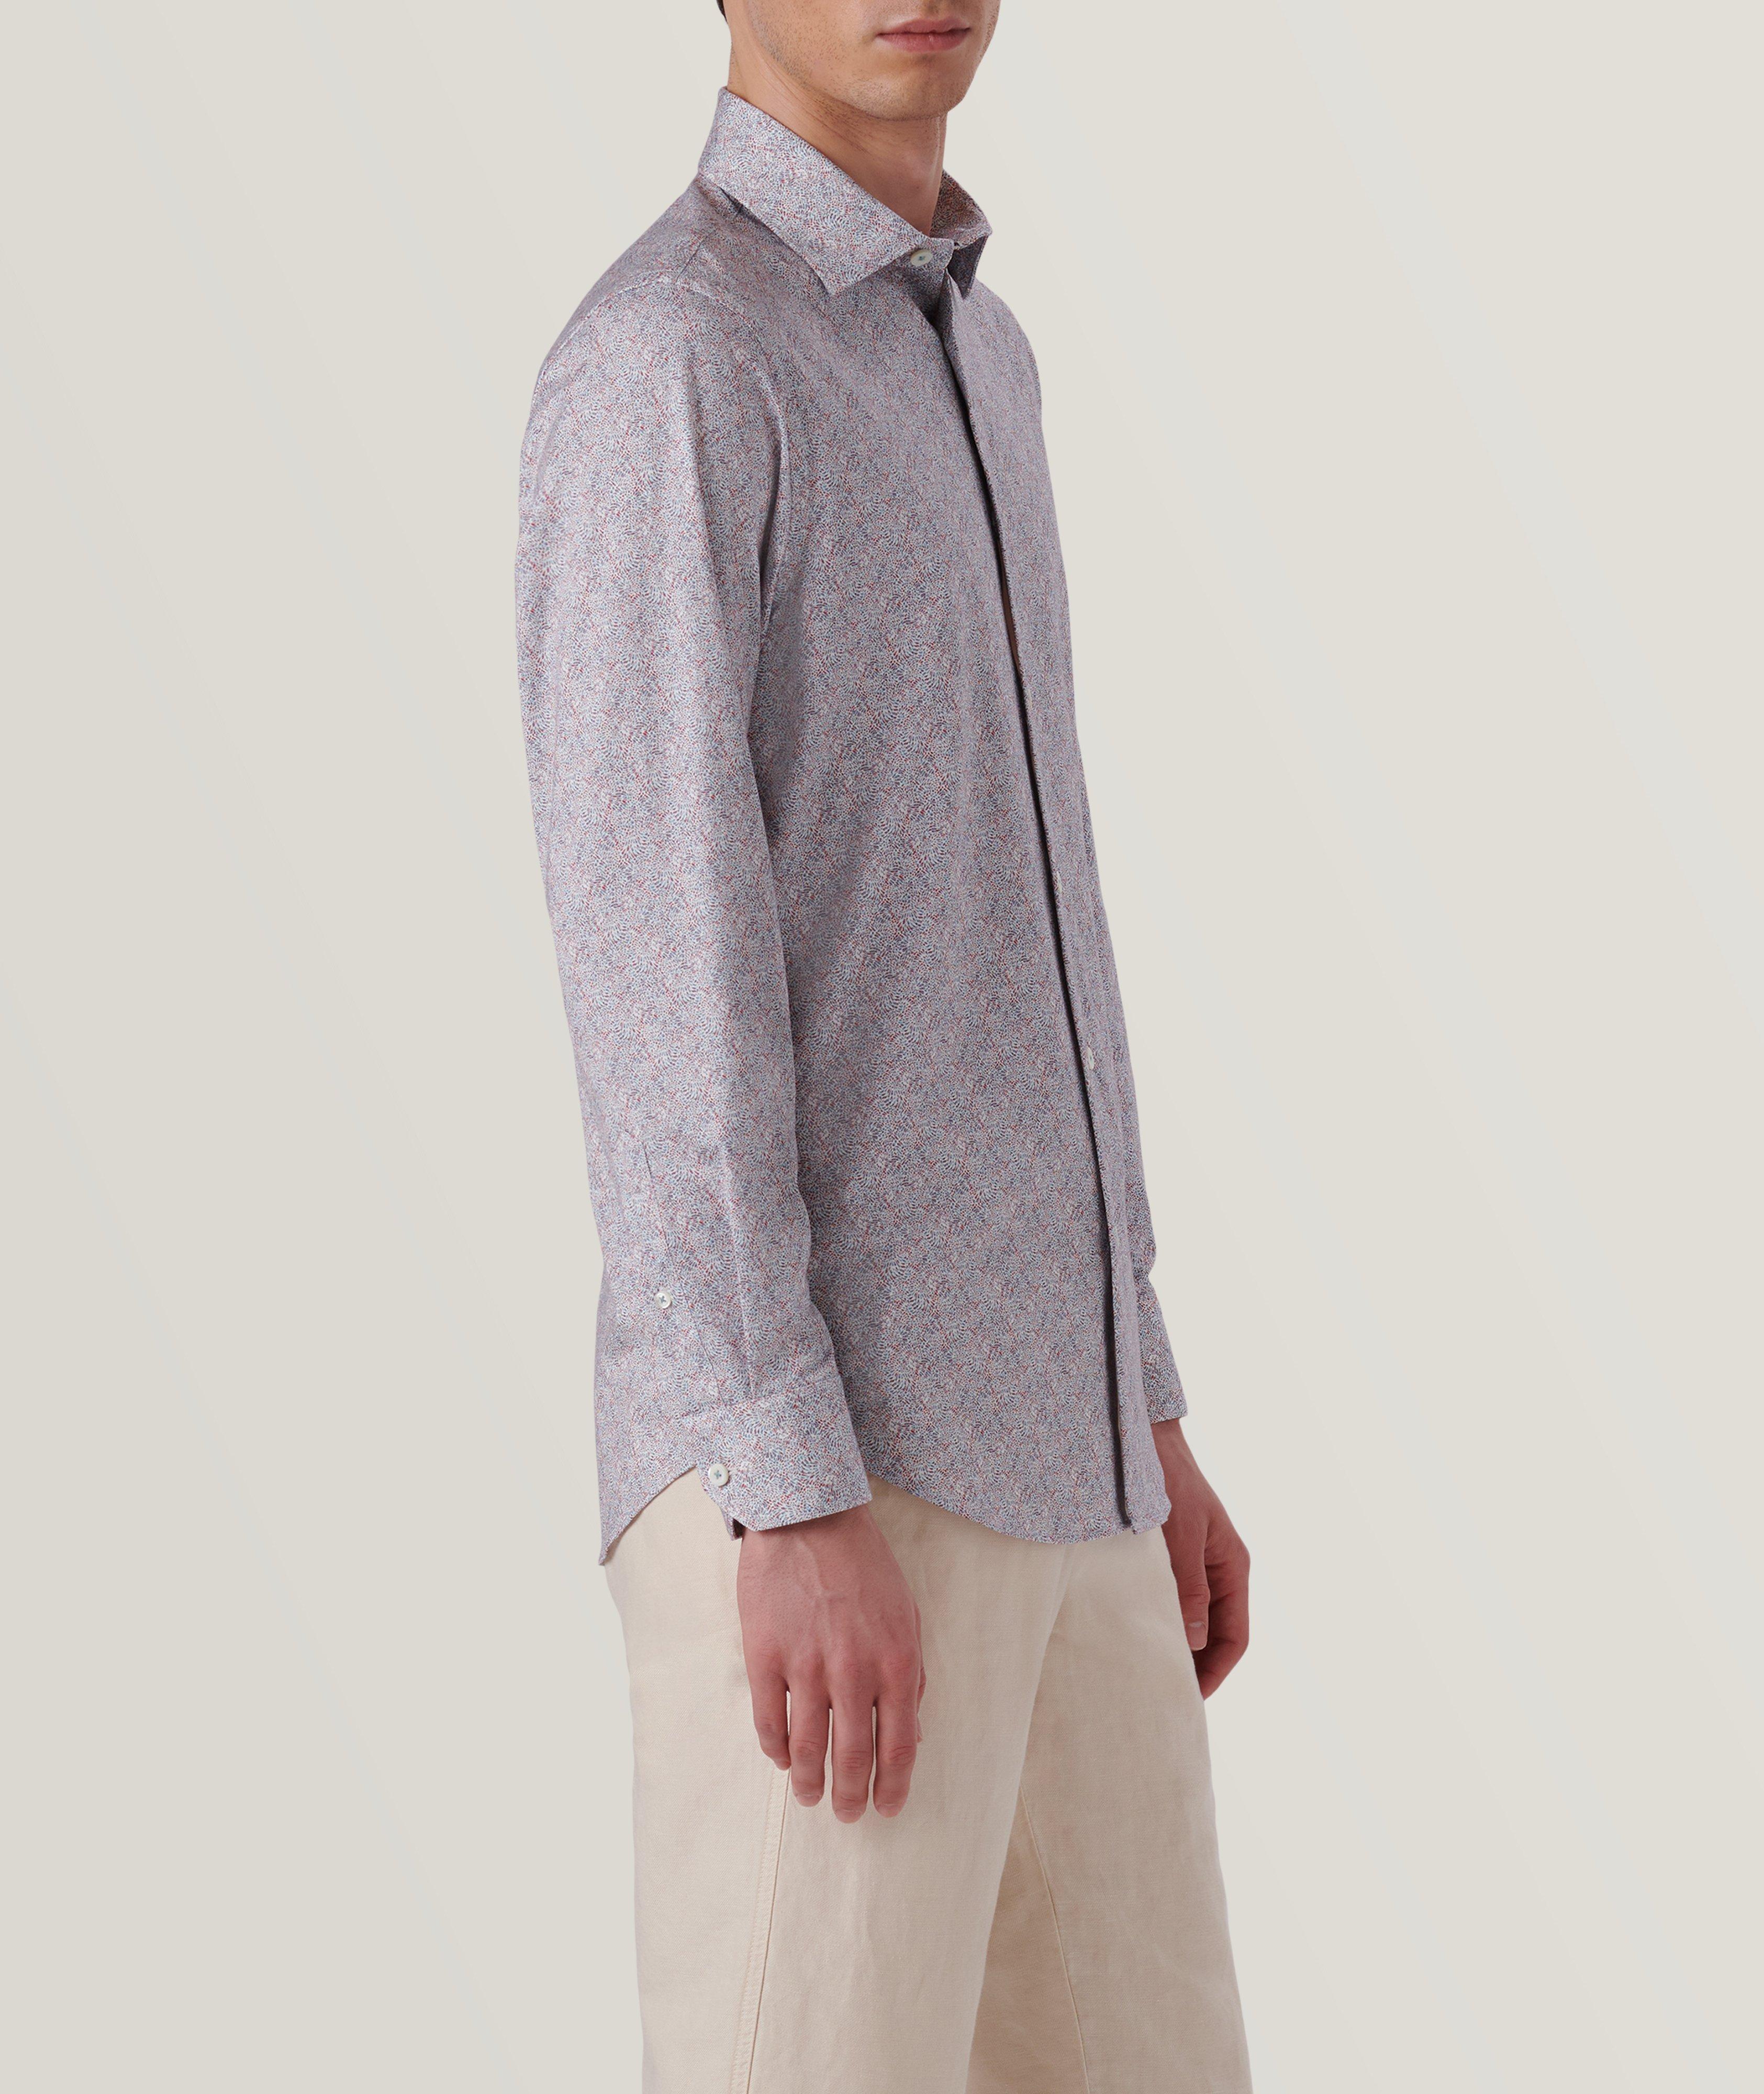 James Abstract Stretch-OoohCotton Sport Shirt image 3